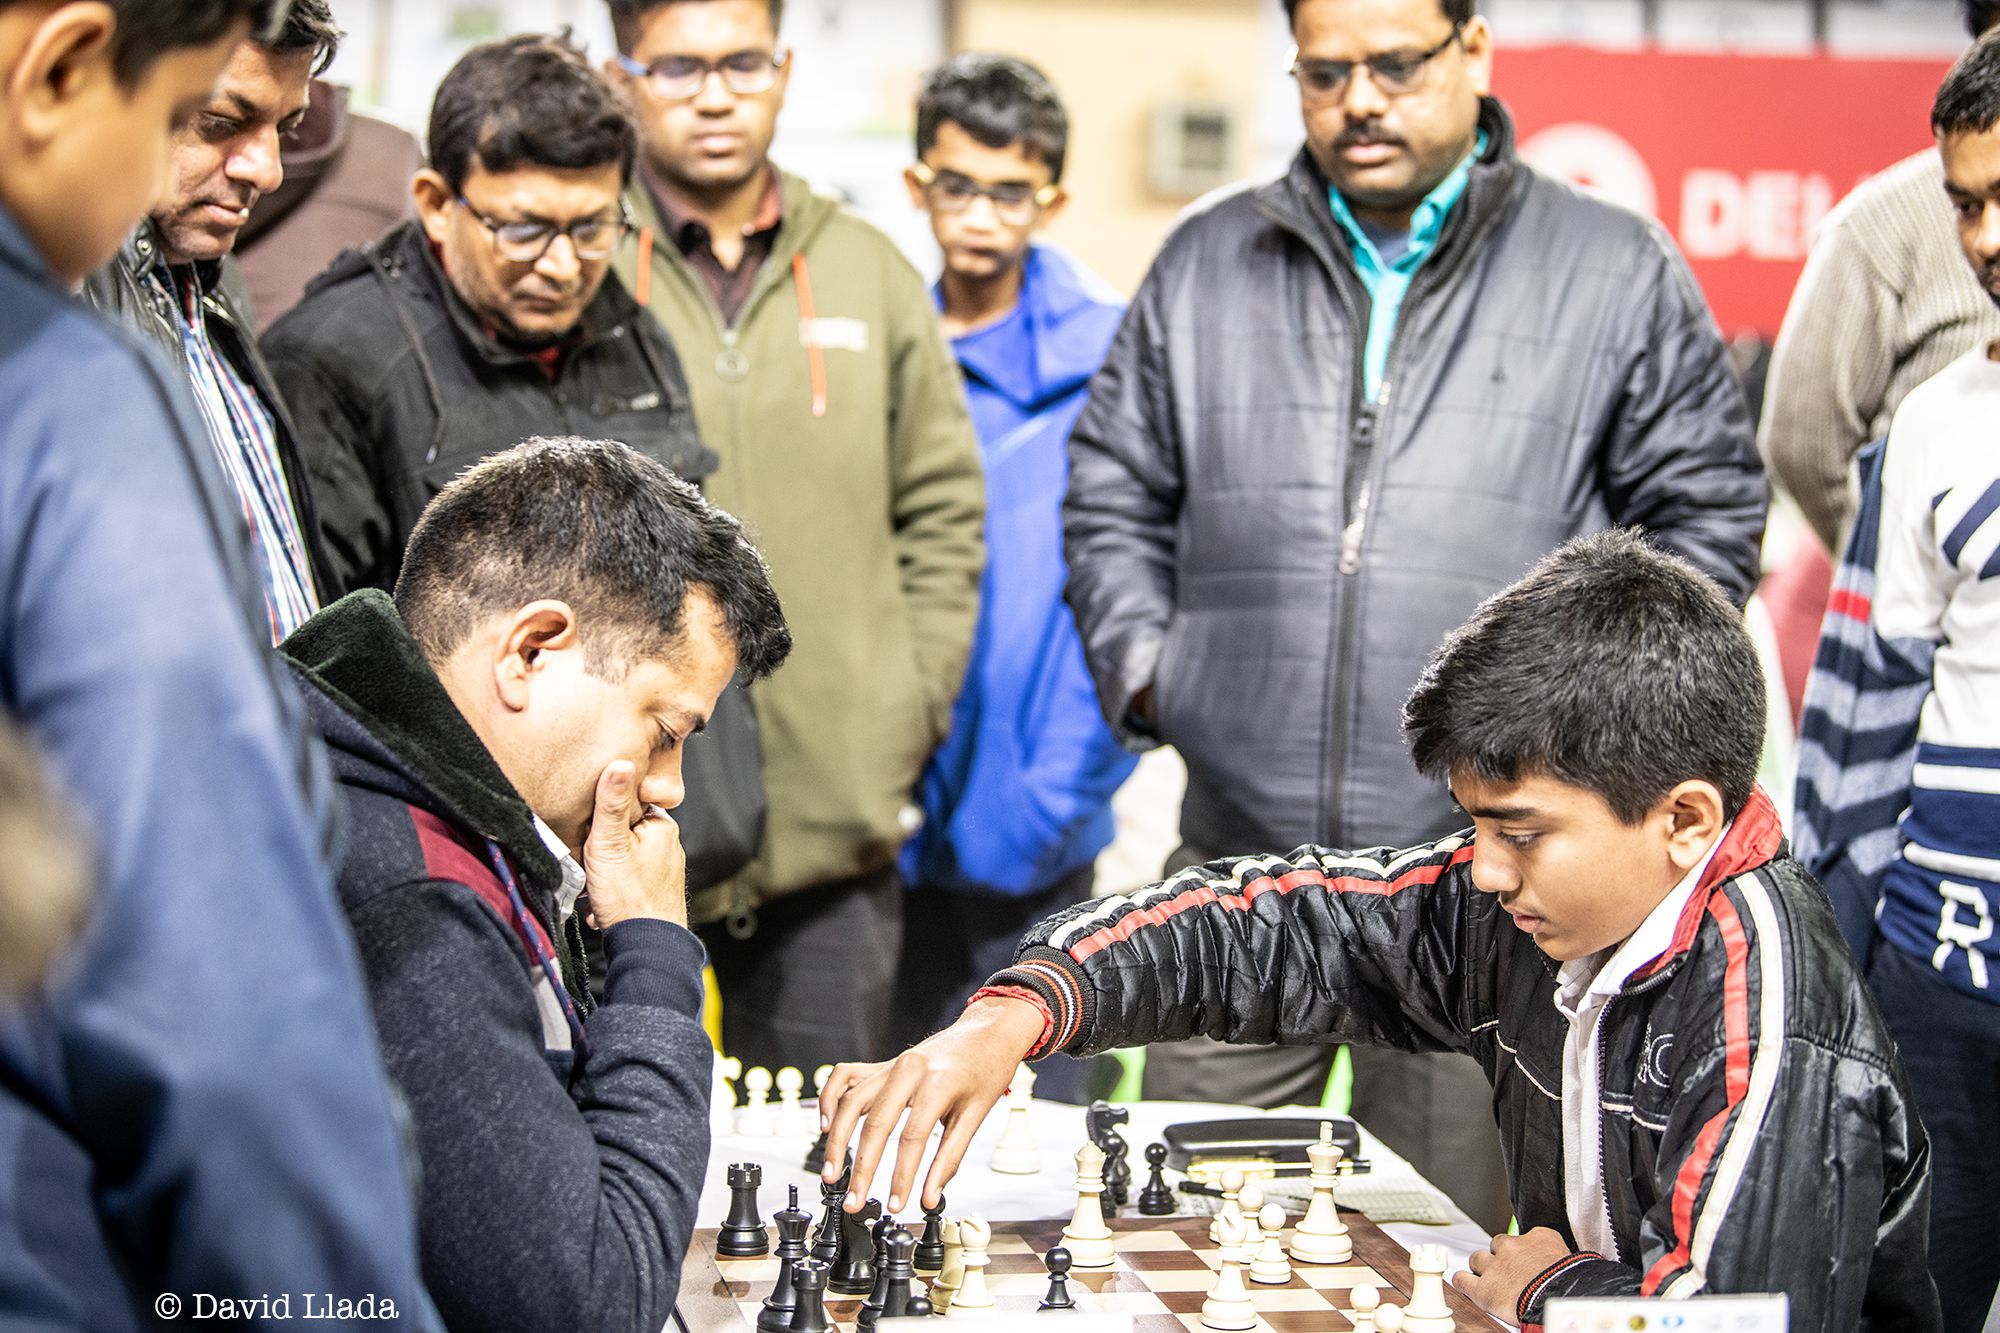 Gukesh D Becomes India's Number 1 Chess Player